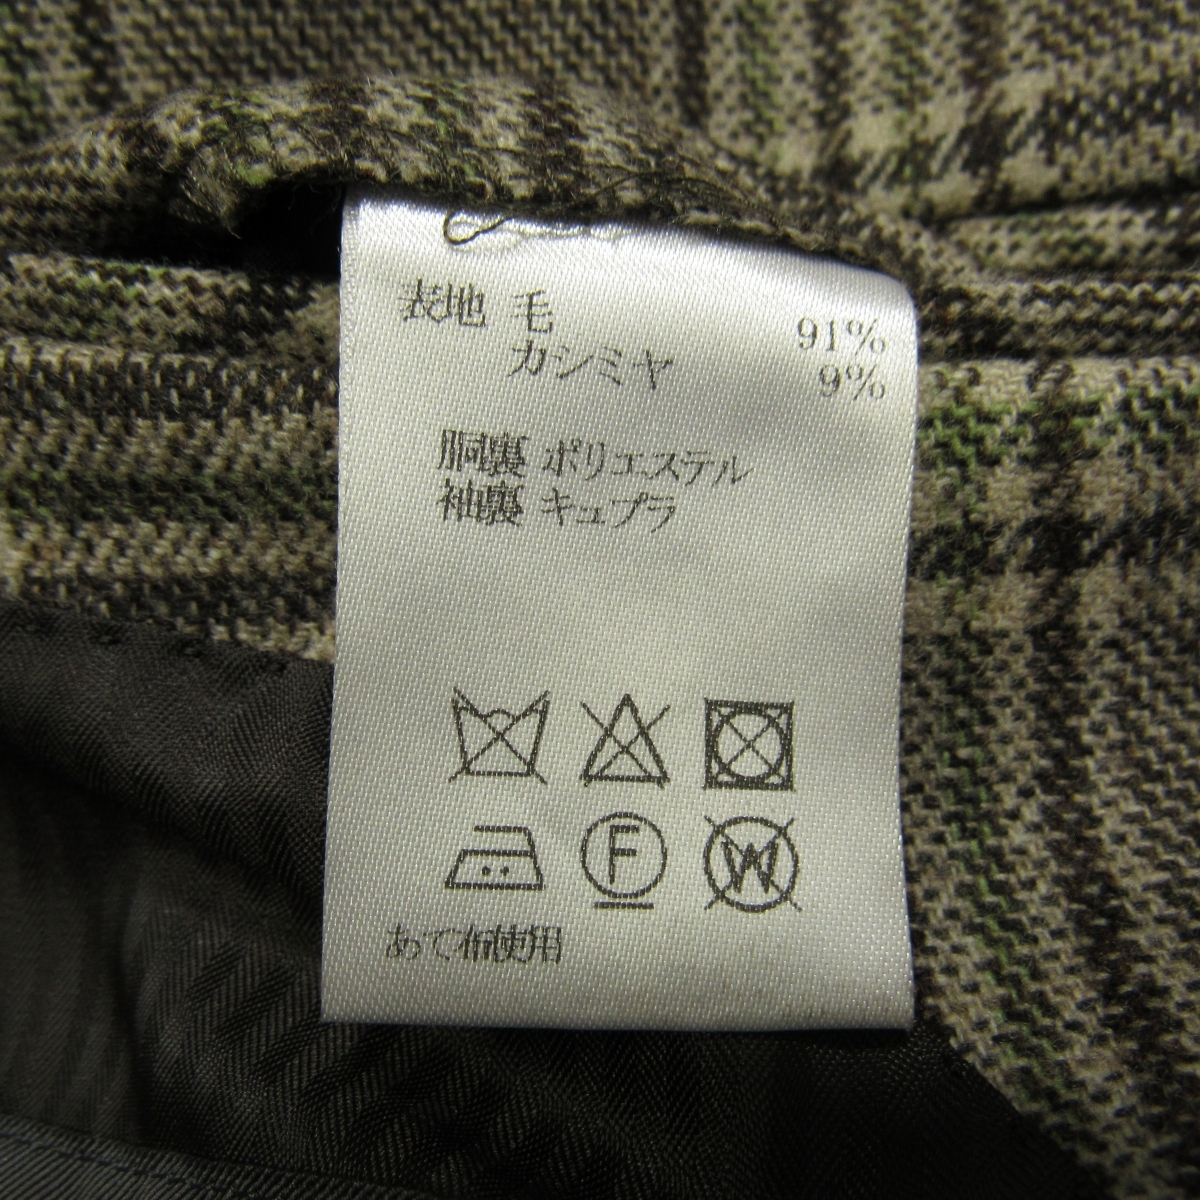  as good as new moa less MORLES.E.THOMAS company manufactured cloth men's cashmere . tailored jacket S autumn winter check pattern wool BEAMS× Aoyama commercial firm 